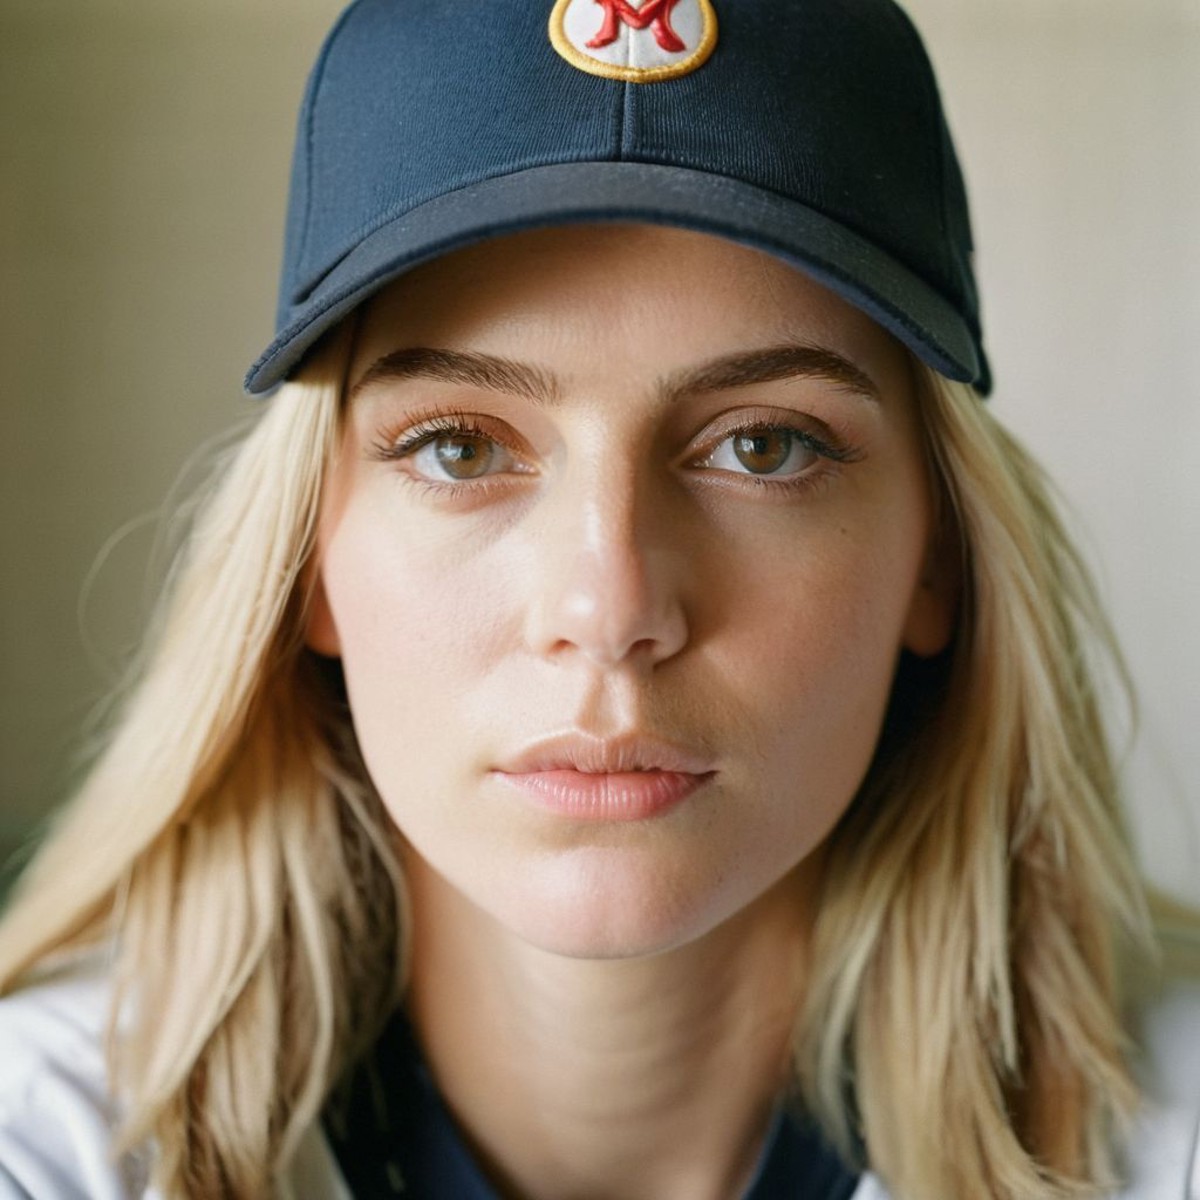 film photography style a woman with hazel eyes and light hair wearing a baseball cap, Close Up, Eye Level, light grain <lo...